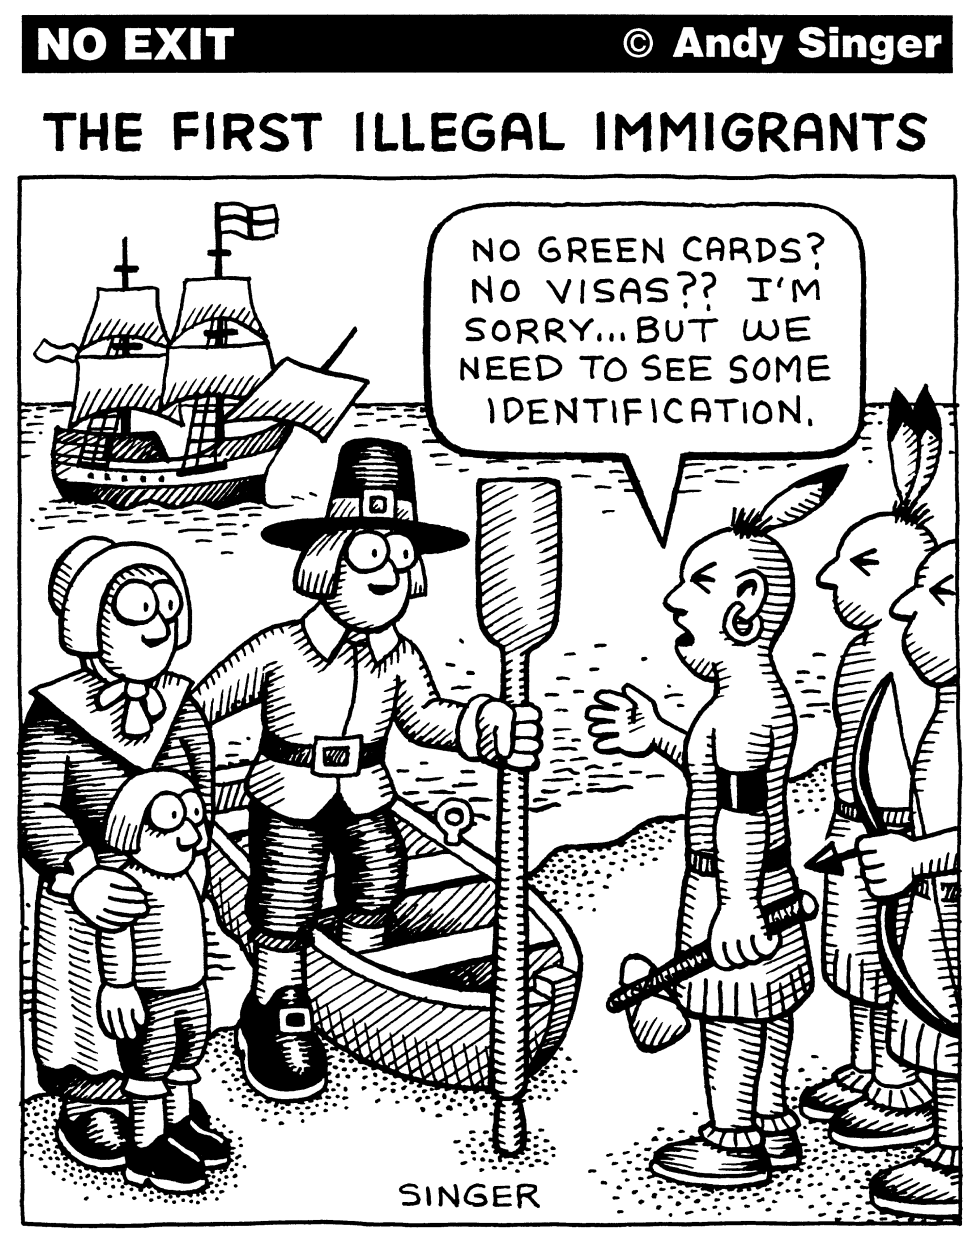 THE FIRST ILLEGAL IMMIGRANTS by Andy Singer